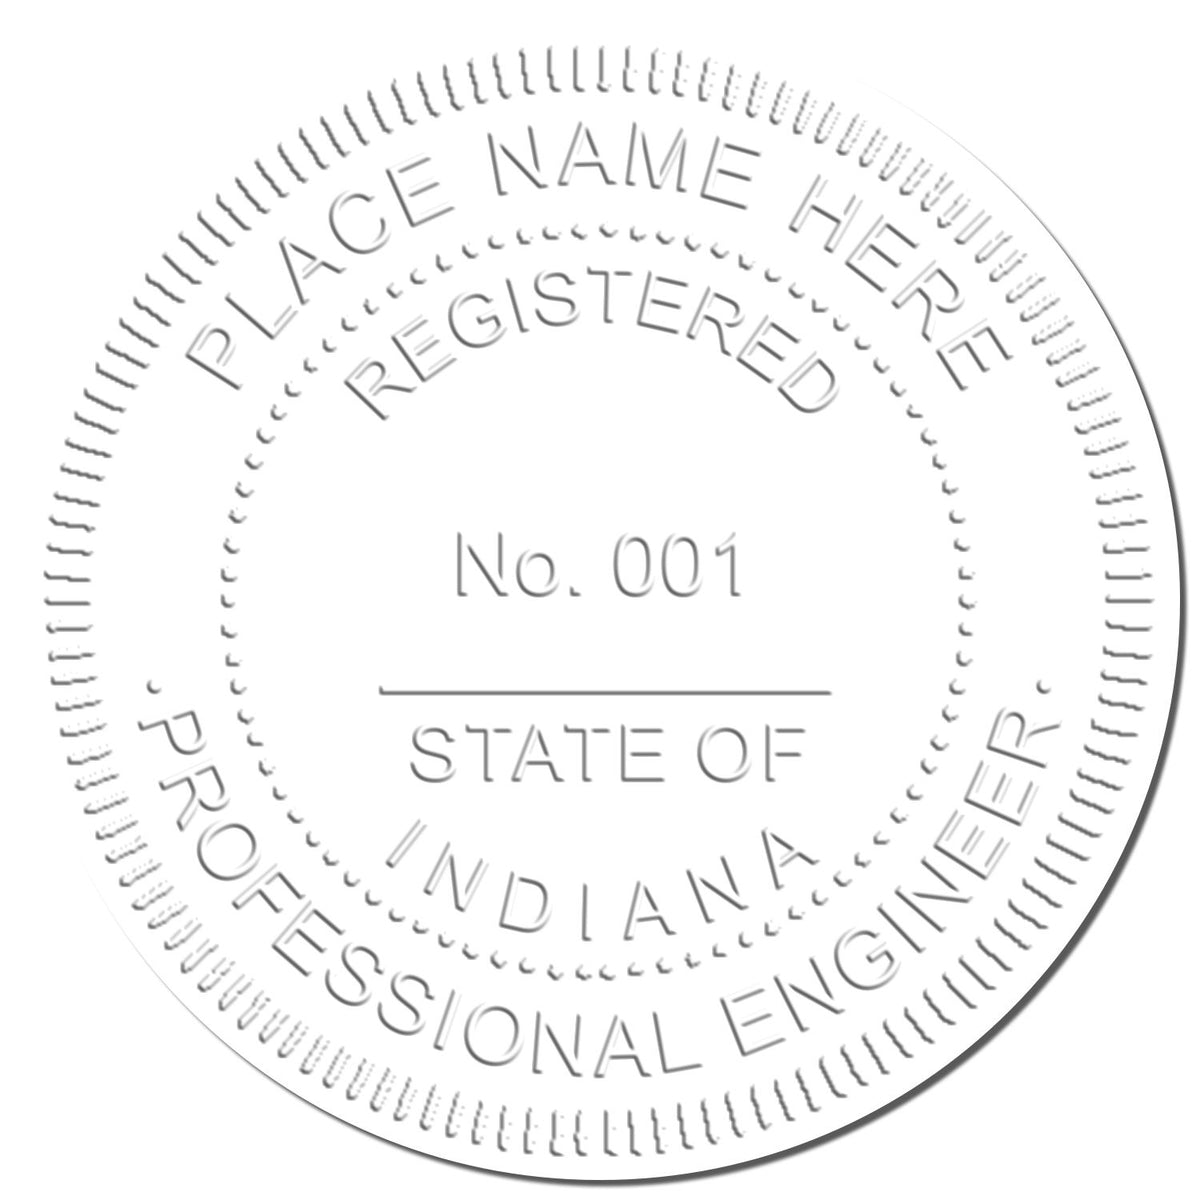 This paper is stamped with a sample imprint of the Hybrid Indiana Engineer Seal, signifying its quality and reliability.